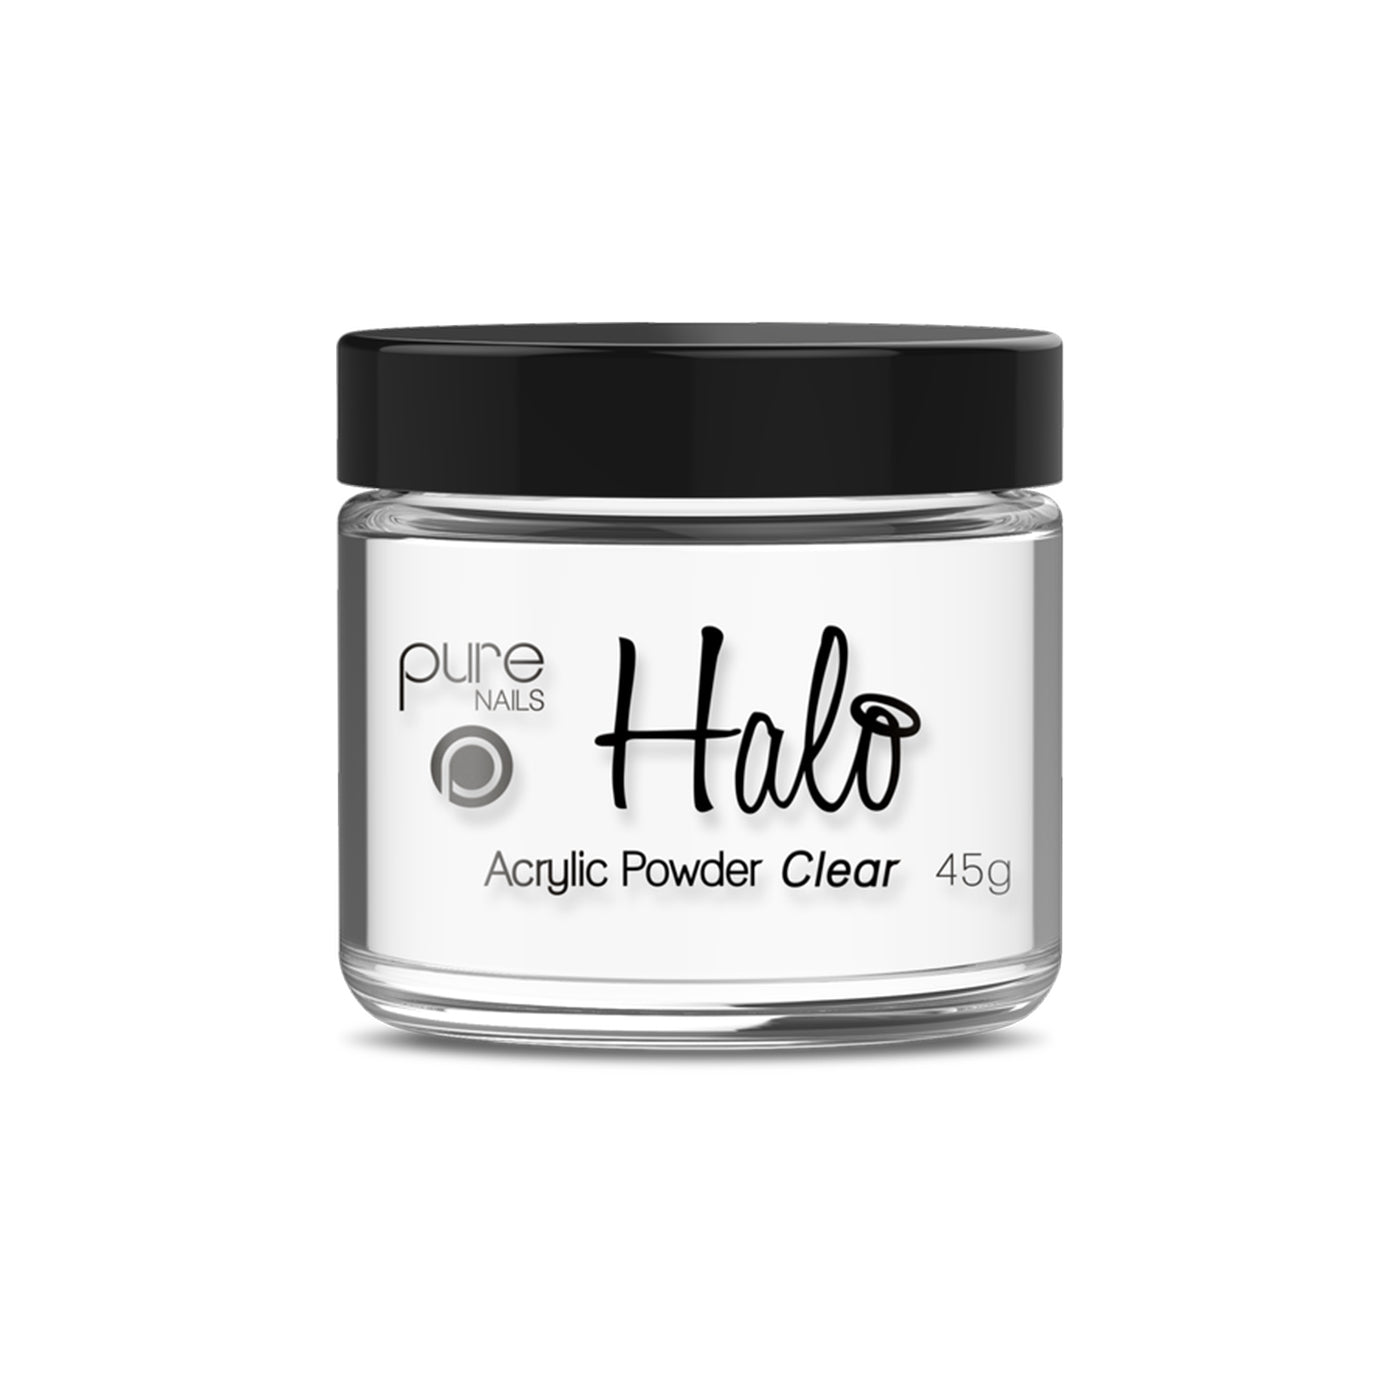 Halo Acrylic Powder - Clear (45g) - Ultimate Hair and Beauty